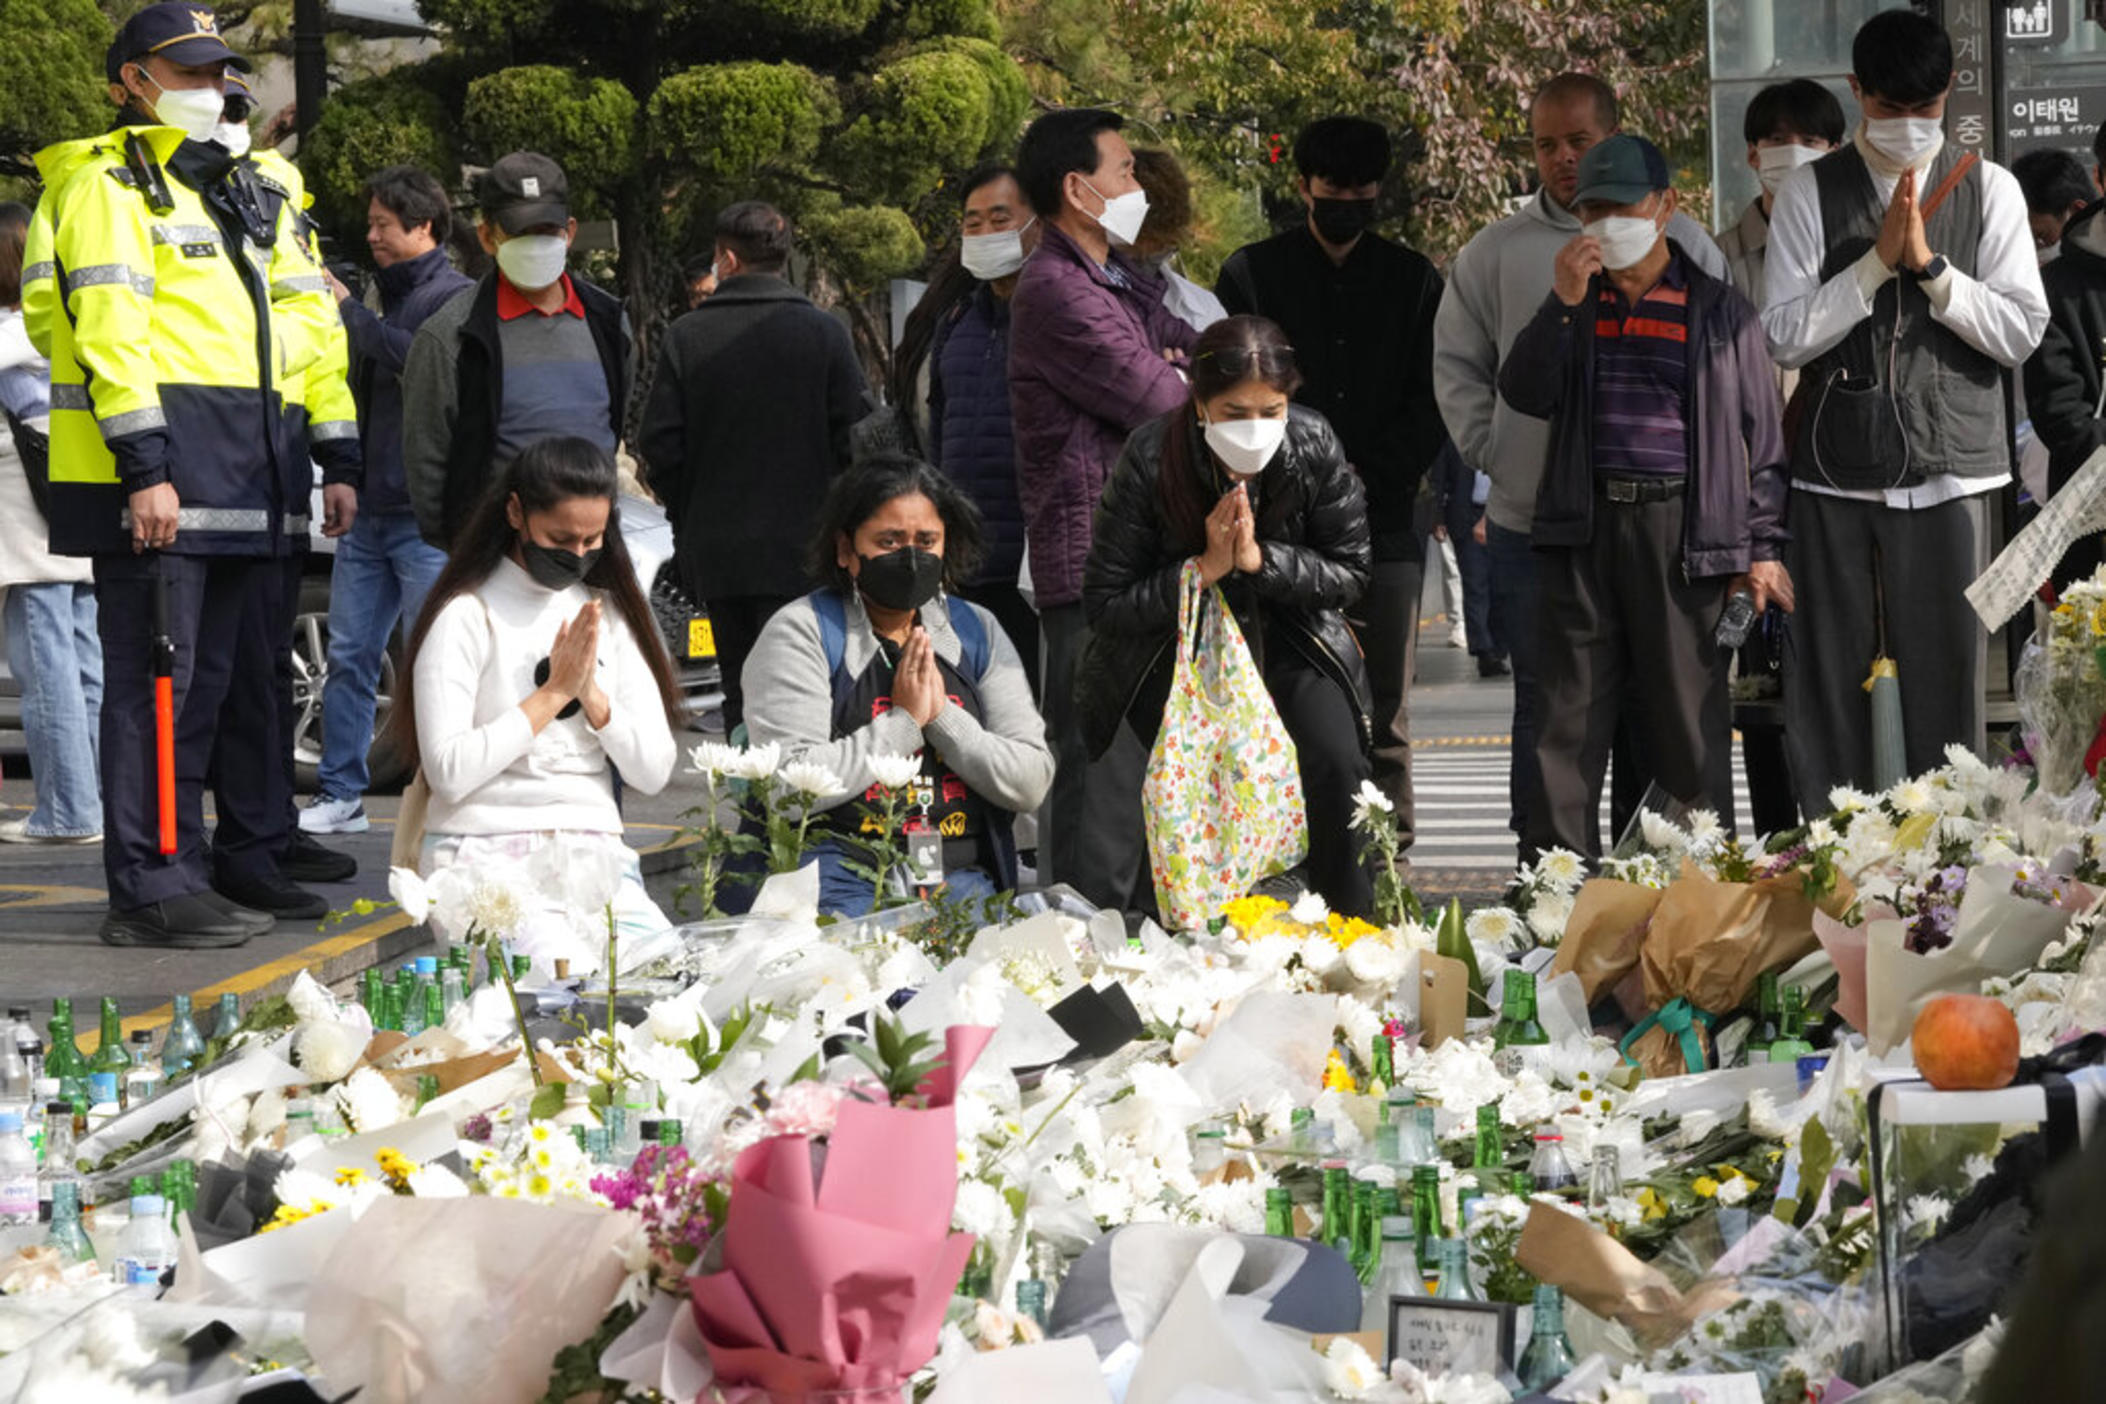  People pray for victims of a deadly accident following Saturday night's Halloween festivities on a street near the scene in Seoul, South Korea, Tuesday, Nov. 1, 2022. An Australian survivor of a crowd crush that killed more than 150 partygoers in the South Korean capital of Seoul blamed the huge loss of life on officials’ failure to employ effective crowd controls despite anticipating a massive turnout for the Halloween celebrations.